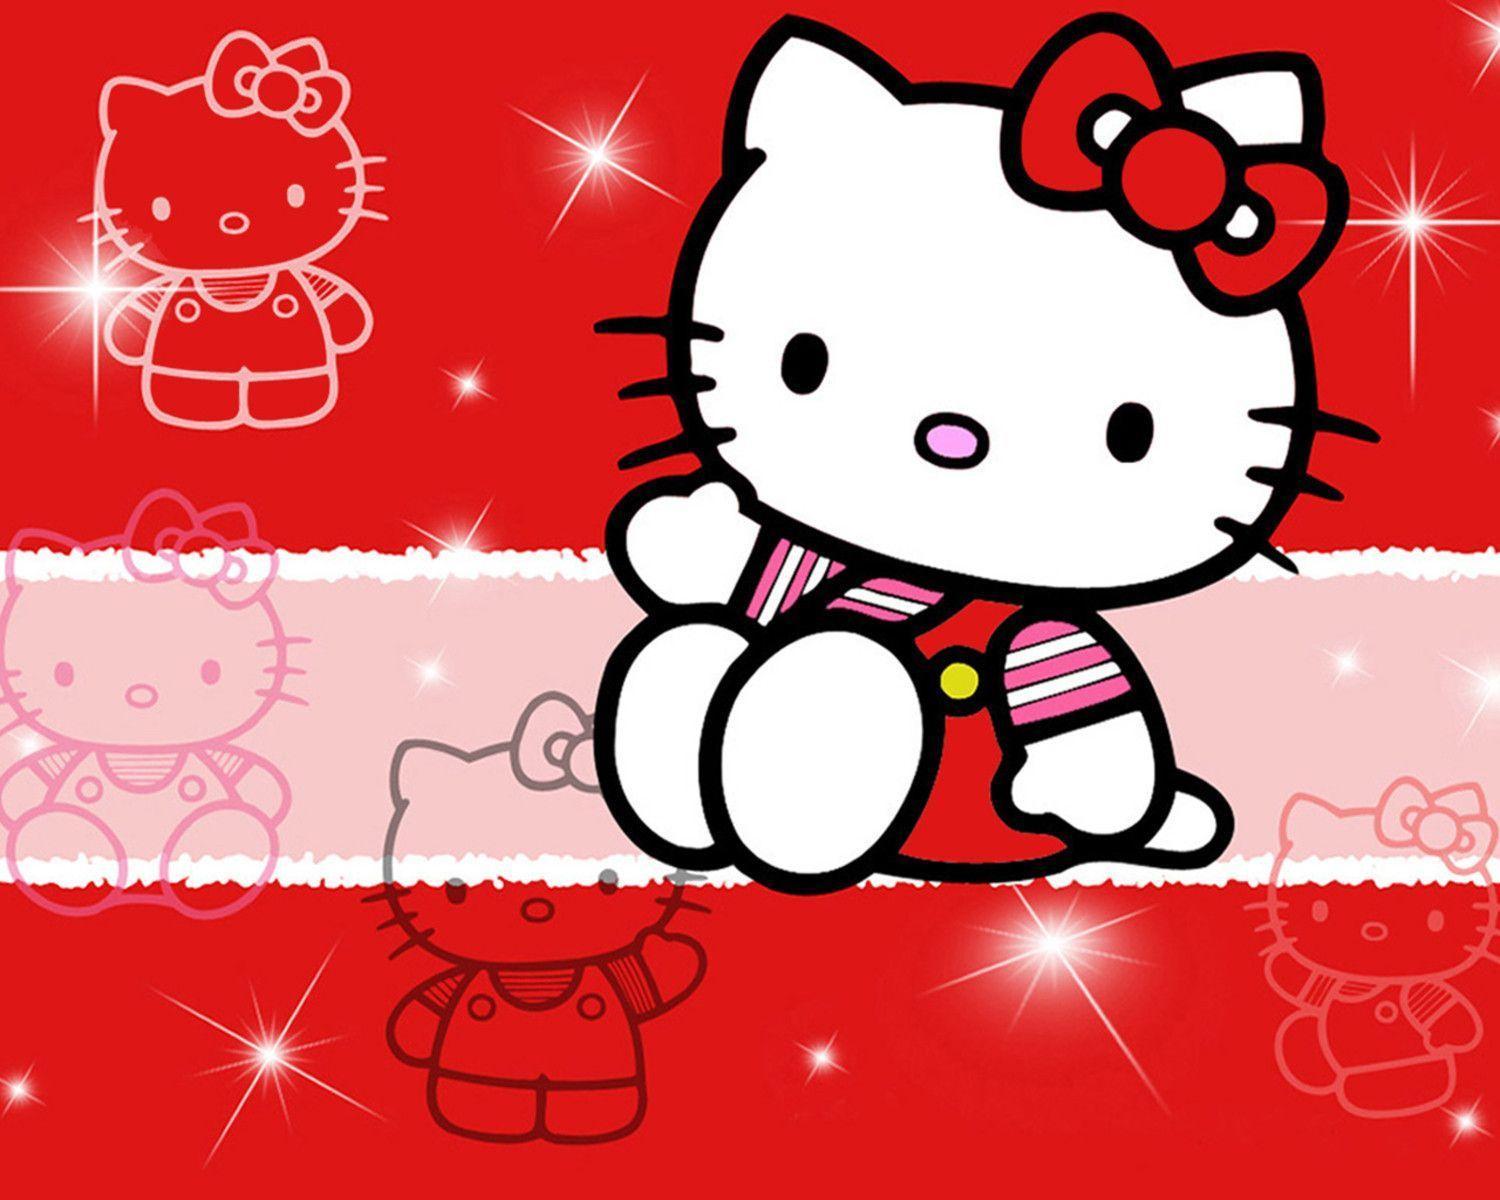 Red Hello Kitty Wallpapers Desktop, wallpaper, Red Hello Kitty